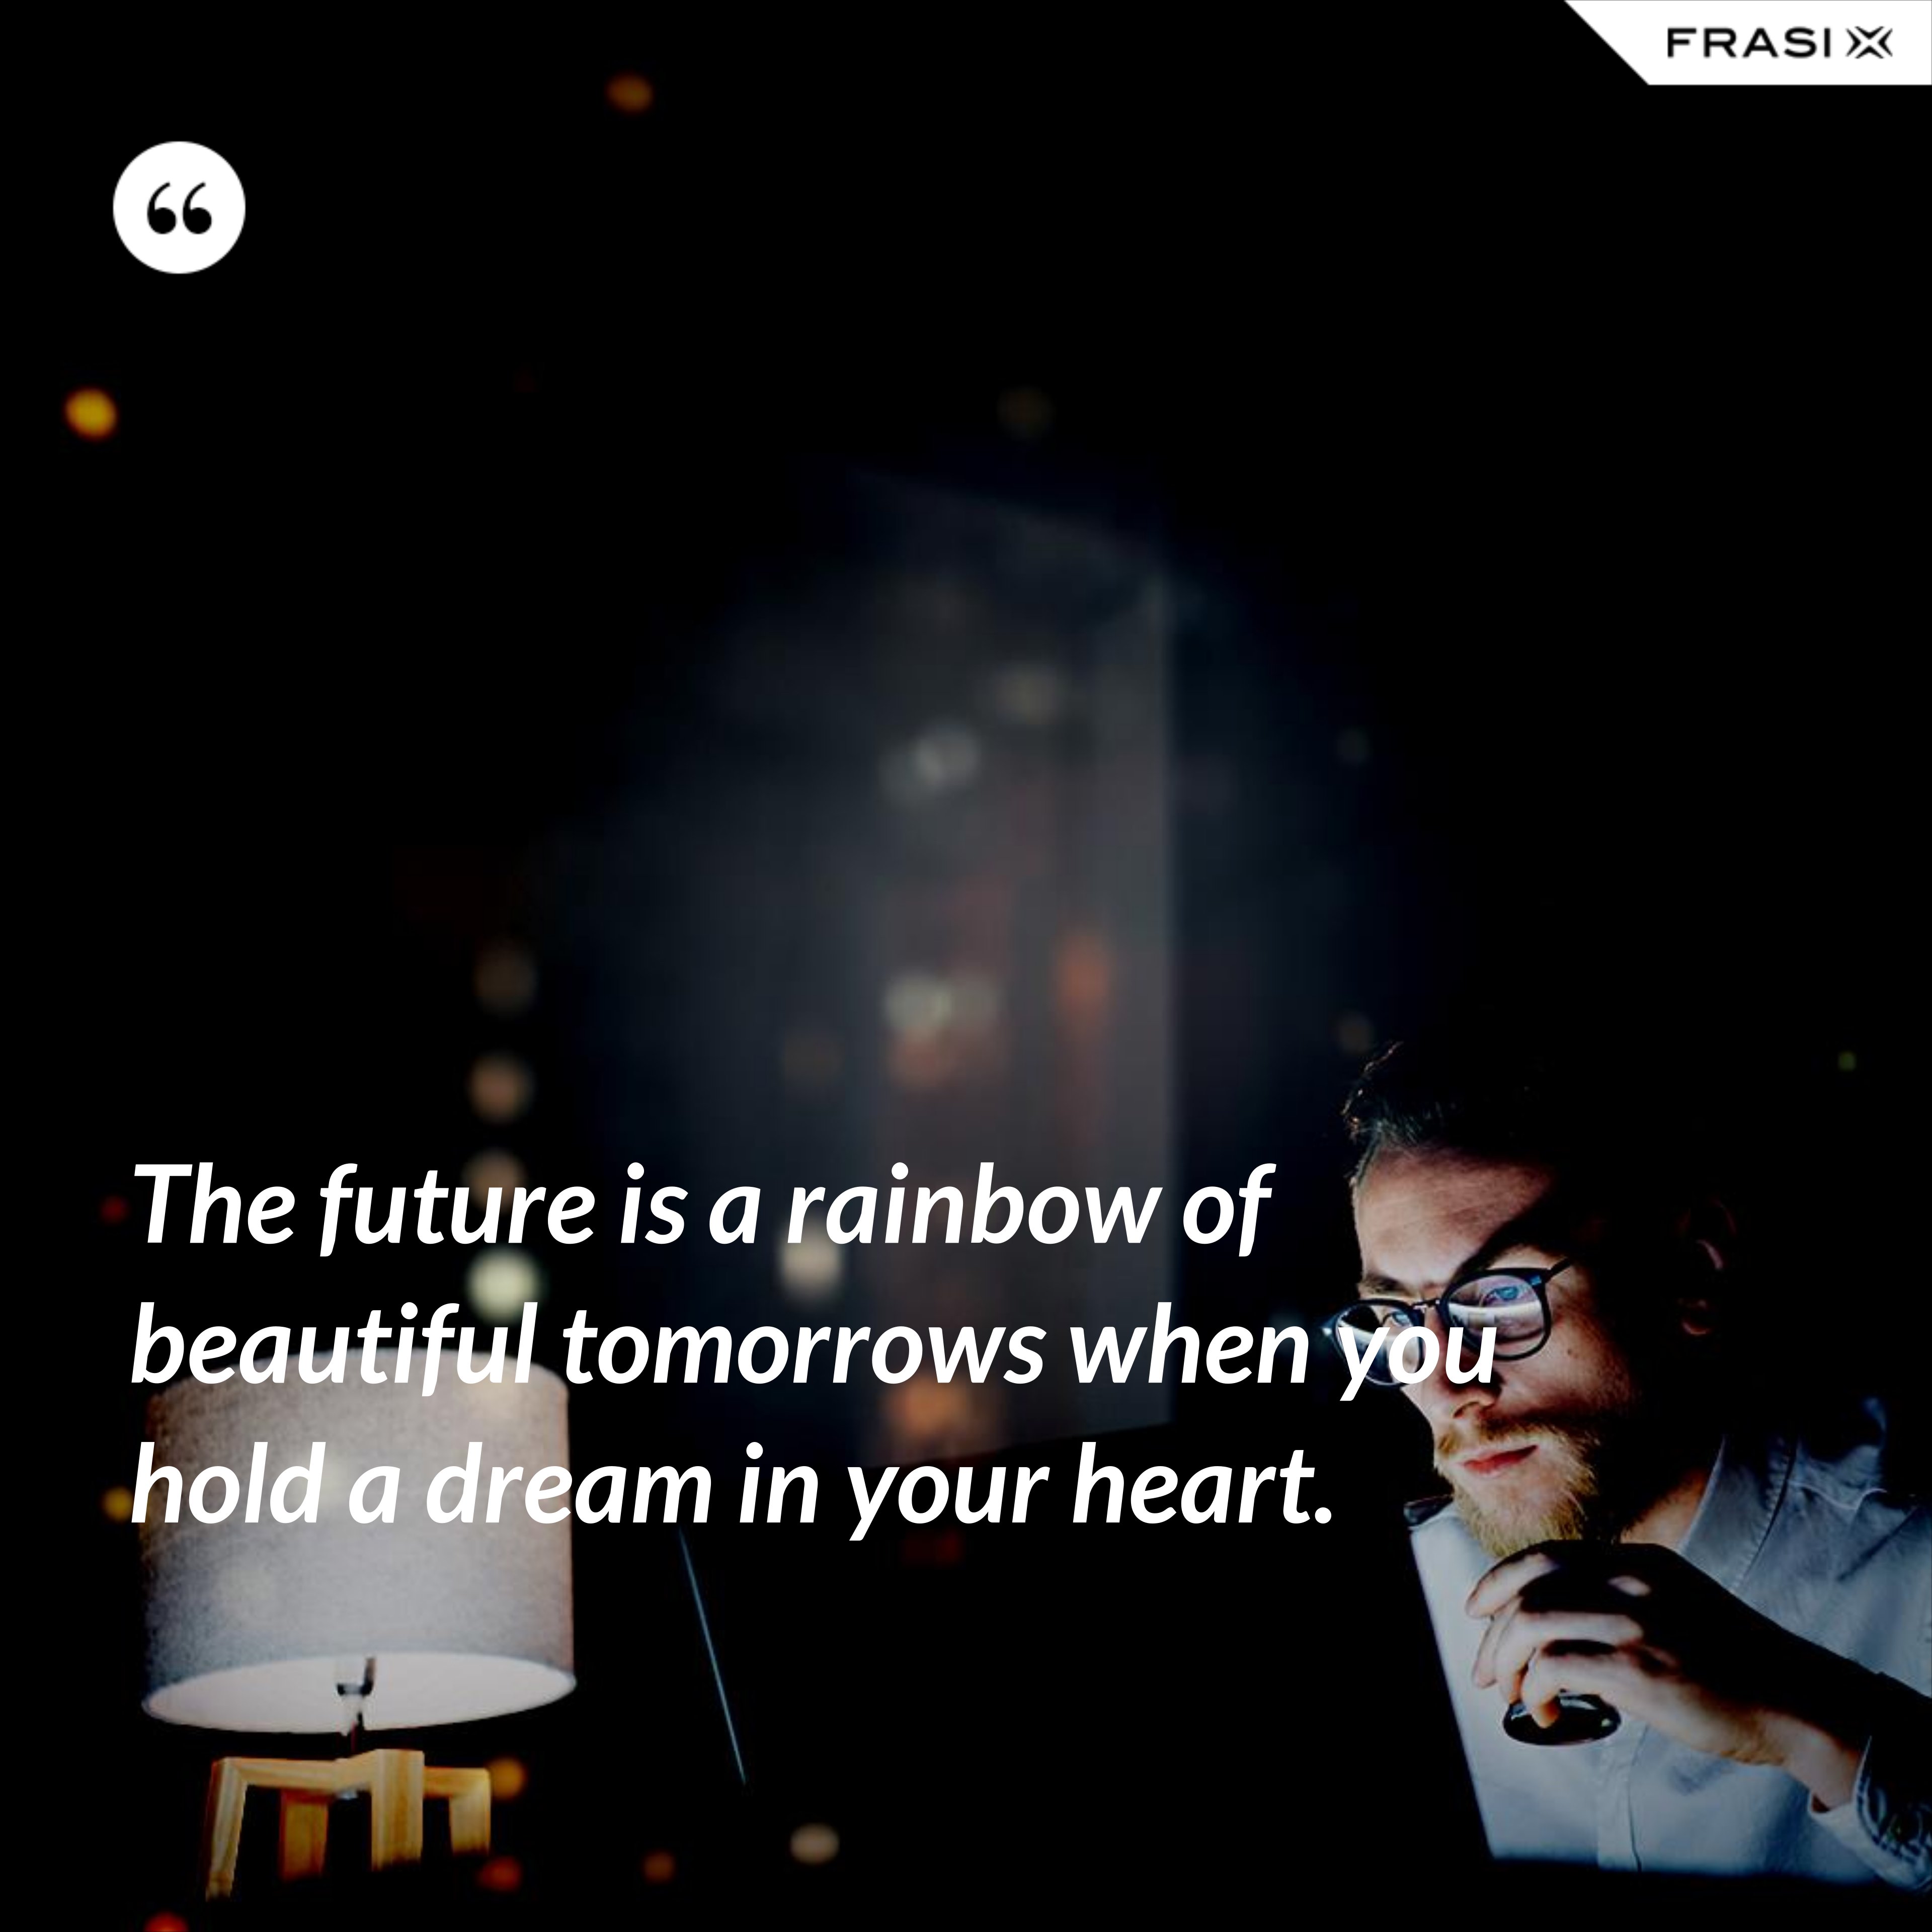 The future is a rainbow of beautiful tomorrows when you hold a dream in your heart. - Anonimo